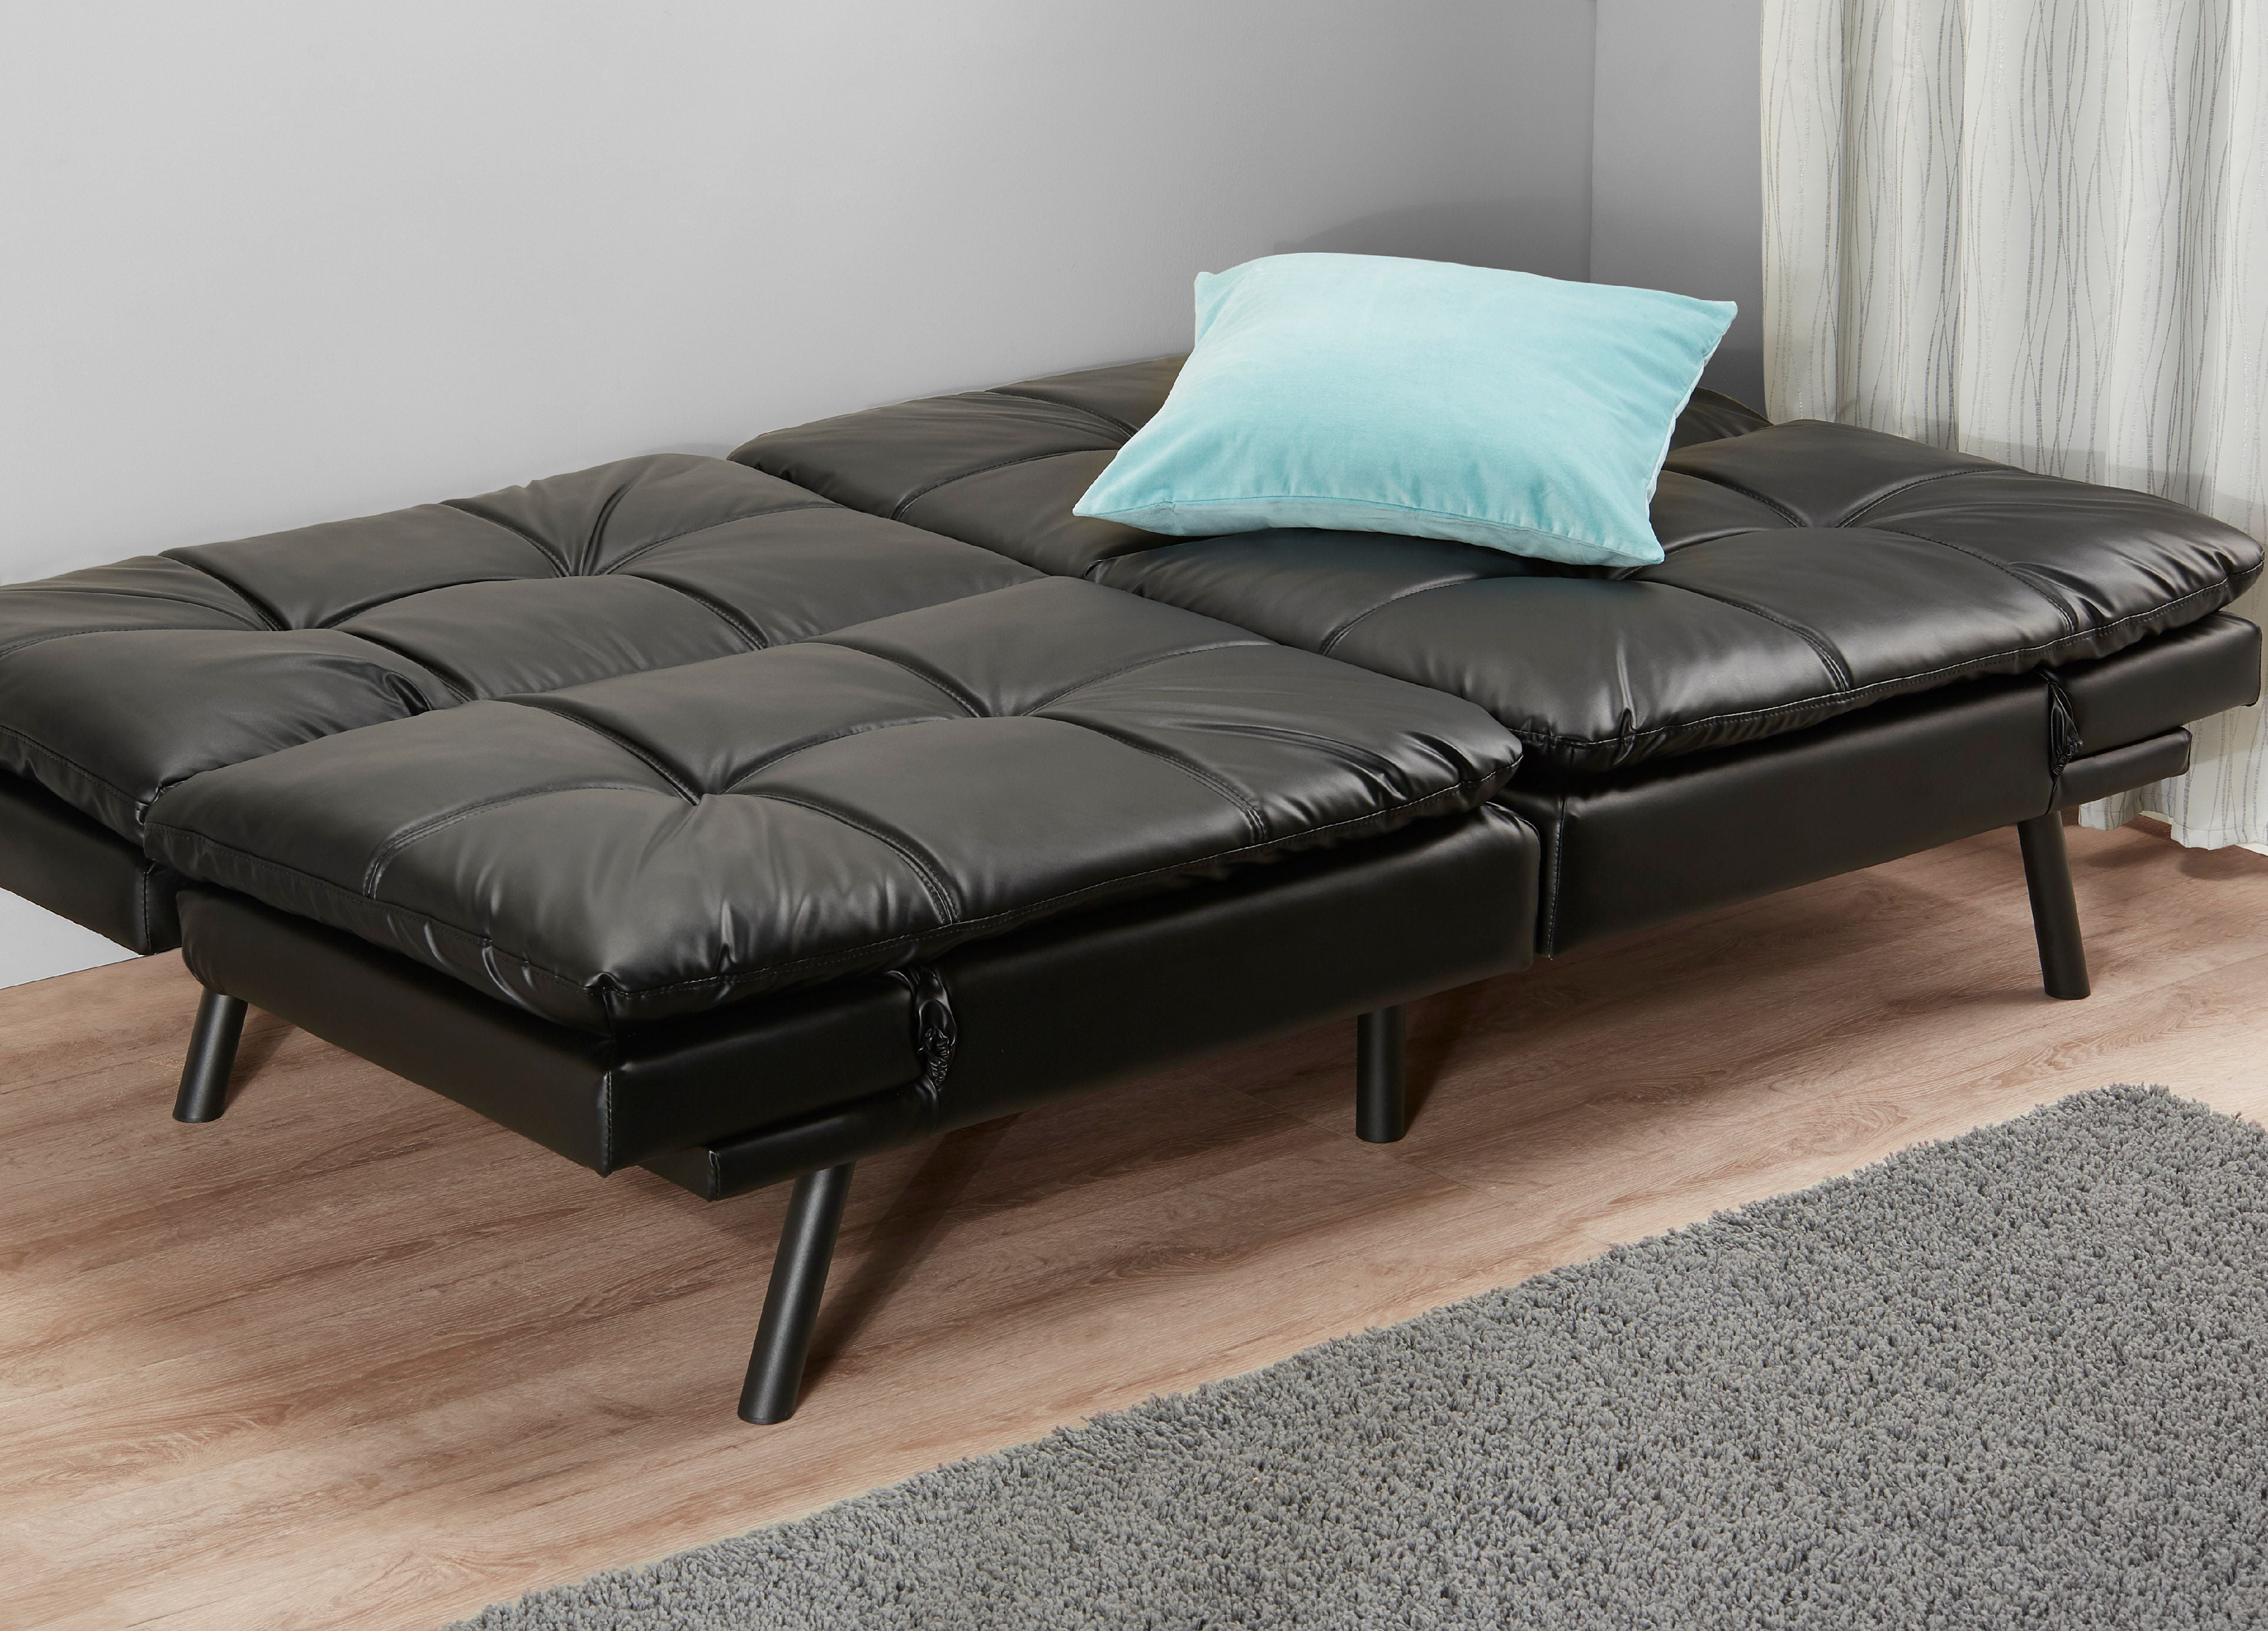 Affordable Futon Beds For Flexible Seating And Sleeping